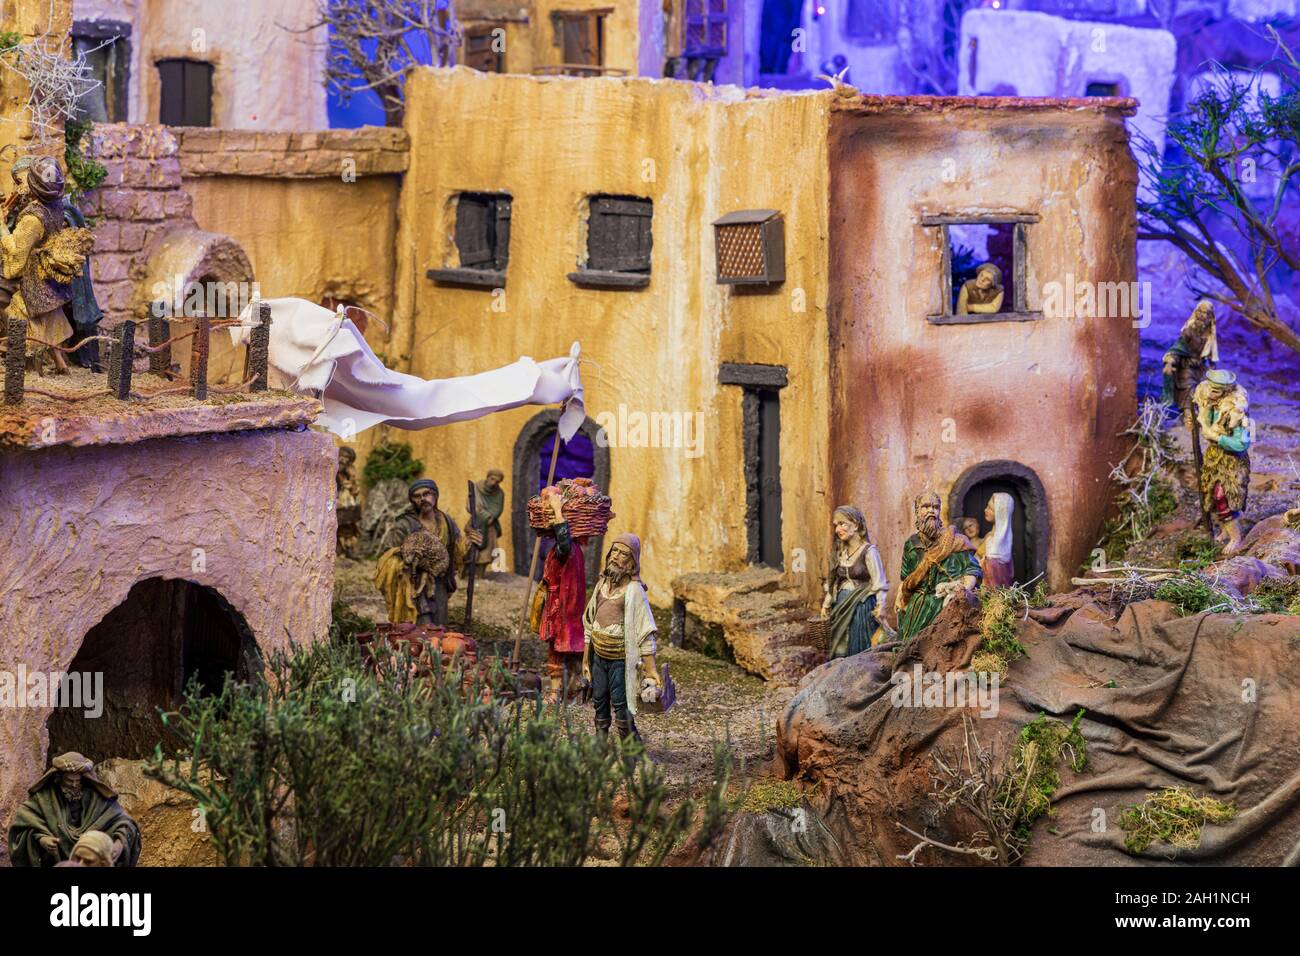 Nativity scene showing the village of Bethlehem with details from the story of the birth of Jesus Christ, diorama on display in San Cristobal de La La Stock Photo